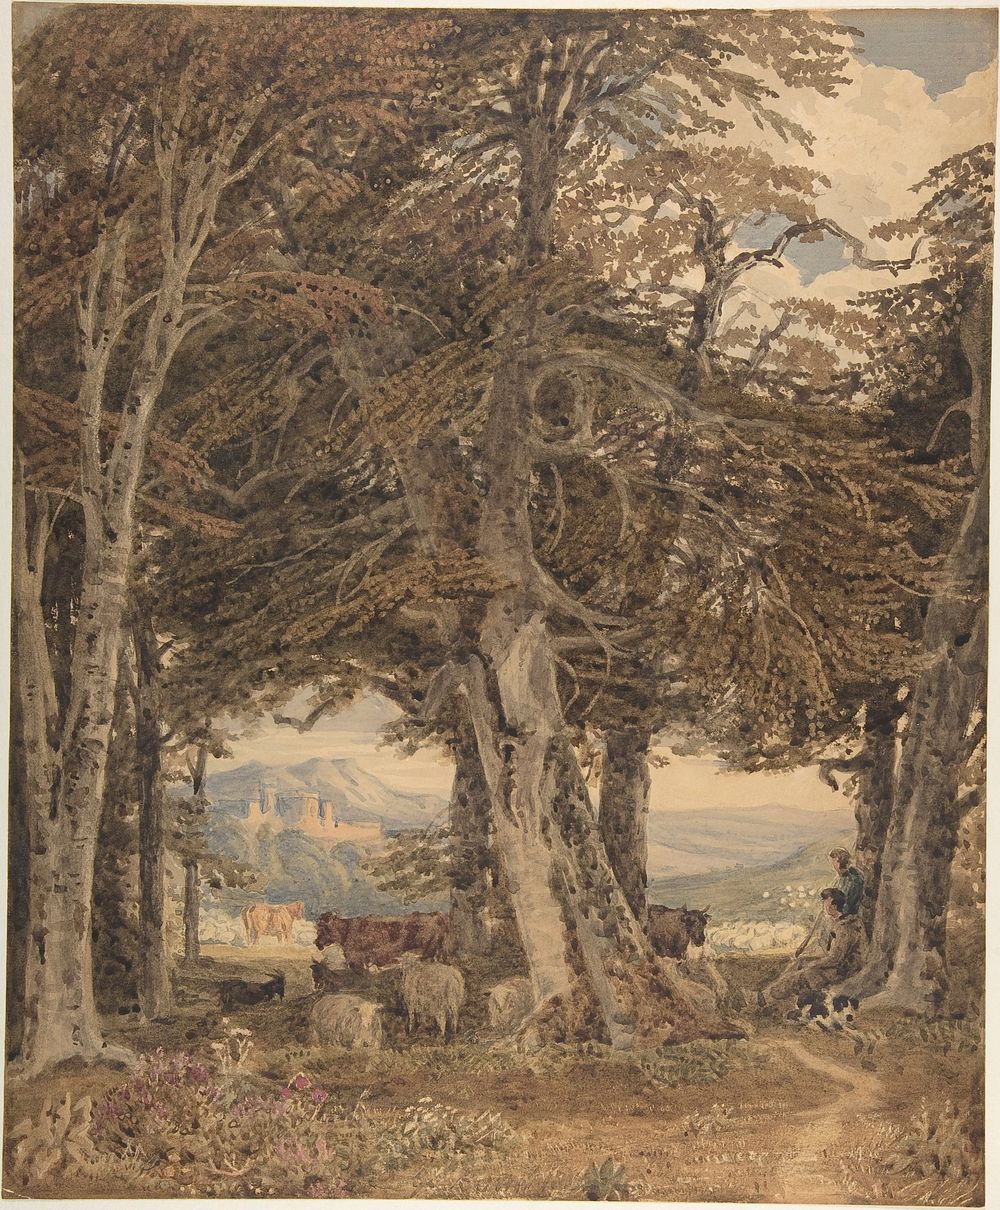 Cattle and Sheep at Resting at the Edge of a Forest by George Barret, the younger